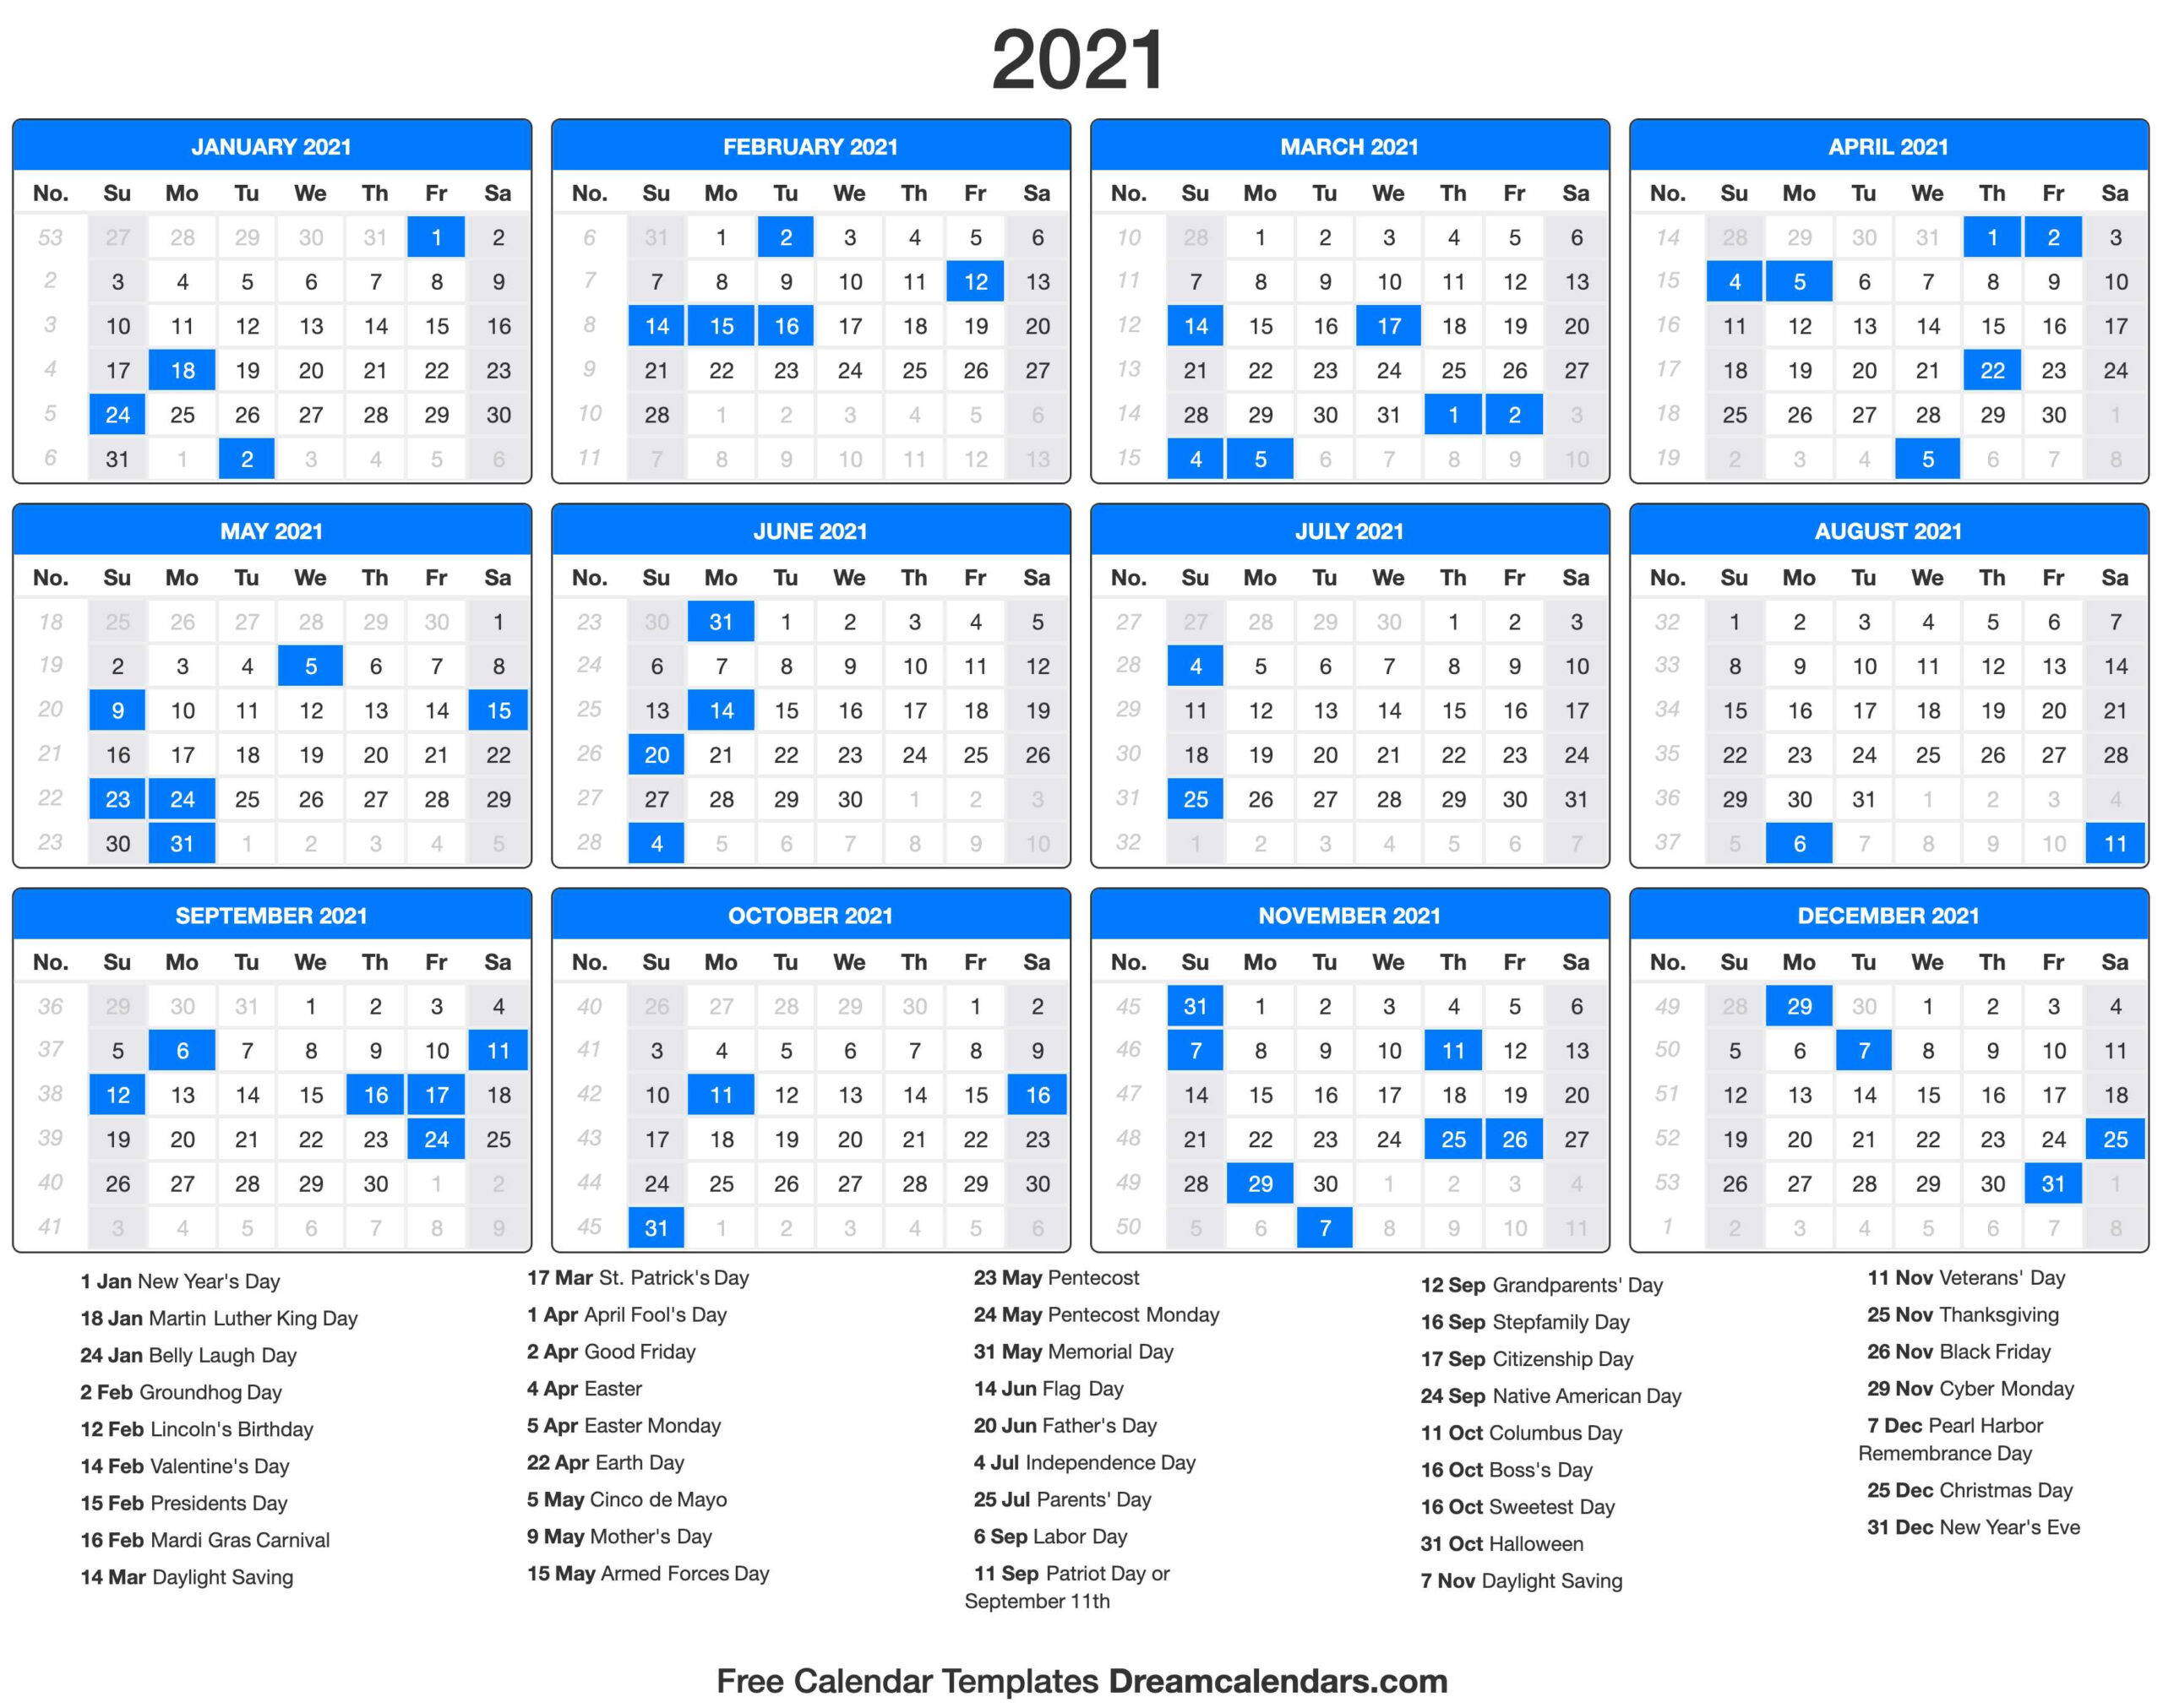 2021 Print Free Calendars Without Downloading Calendar